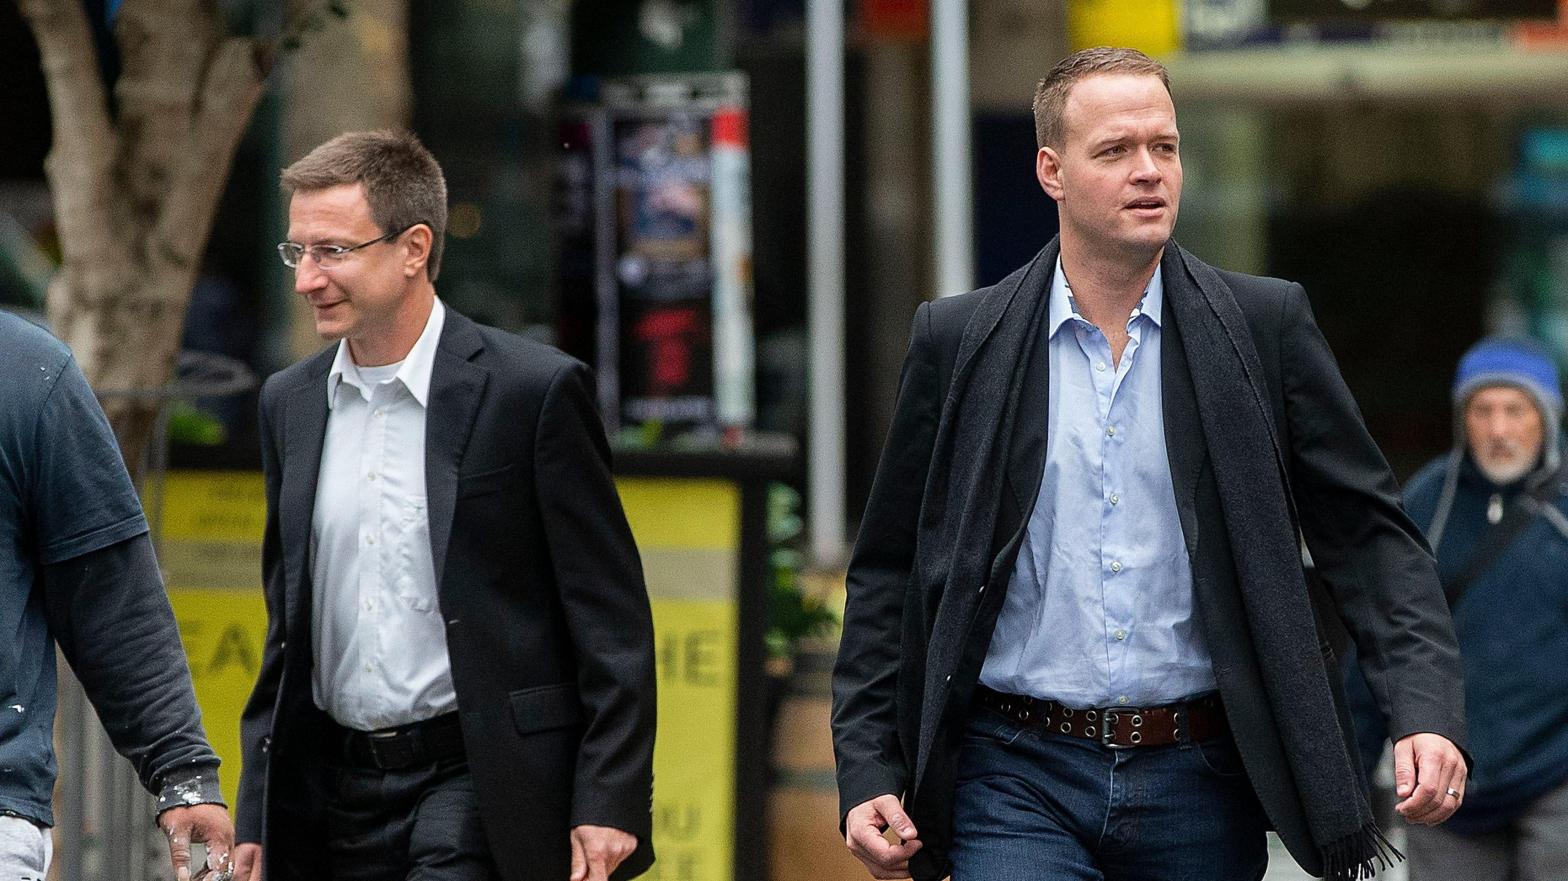 Mathias Ortmann (left) and Bram van der Kolk (right) were two of the leaders of the Megaupload site, and a New Zealand judge claimed the pair had the know-how to keep the pirating site running for nearly seven years. (Photo: Hagen Hopkins, Getty Images)